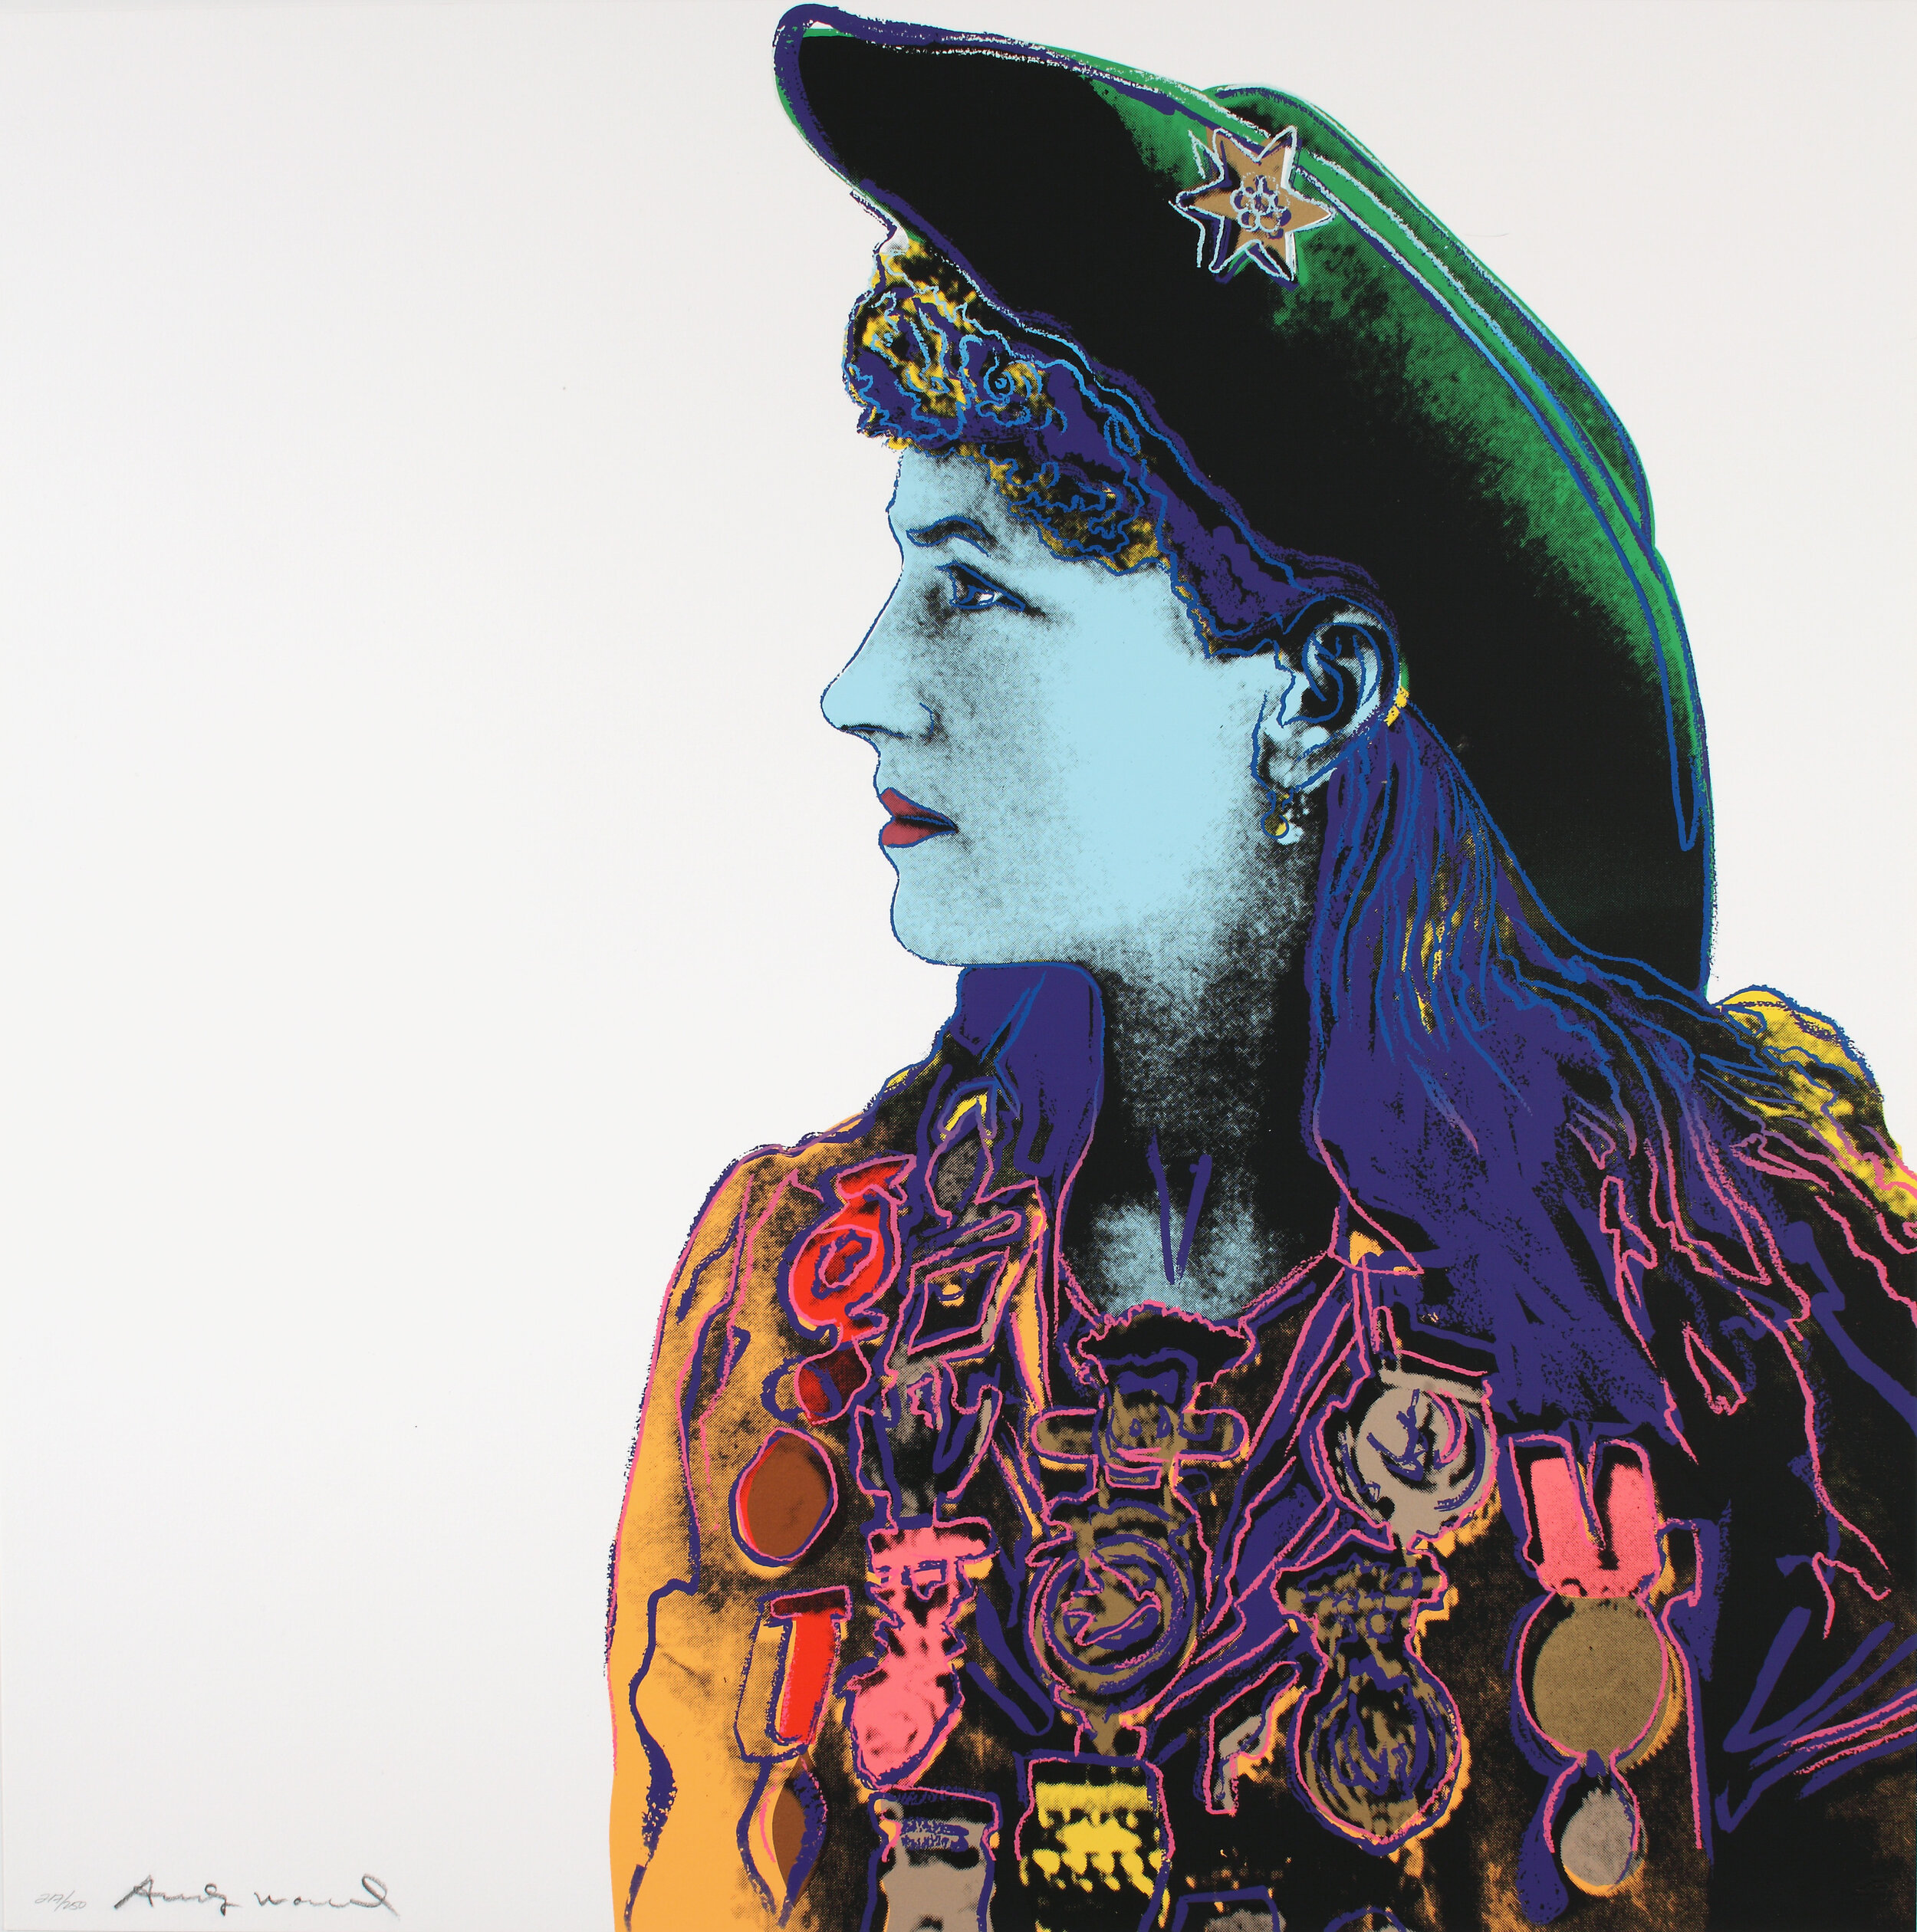 Andy Warhol, Cowboys and Indians: Annie Oakley, 1986The Andy Warhol Museum, Pittsburgh; Founding Collection, Contribution The Andy Warhol Foundation for the Visual Arts, Inc.1998.1.2493.2